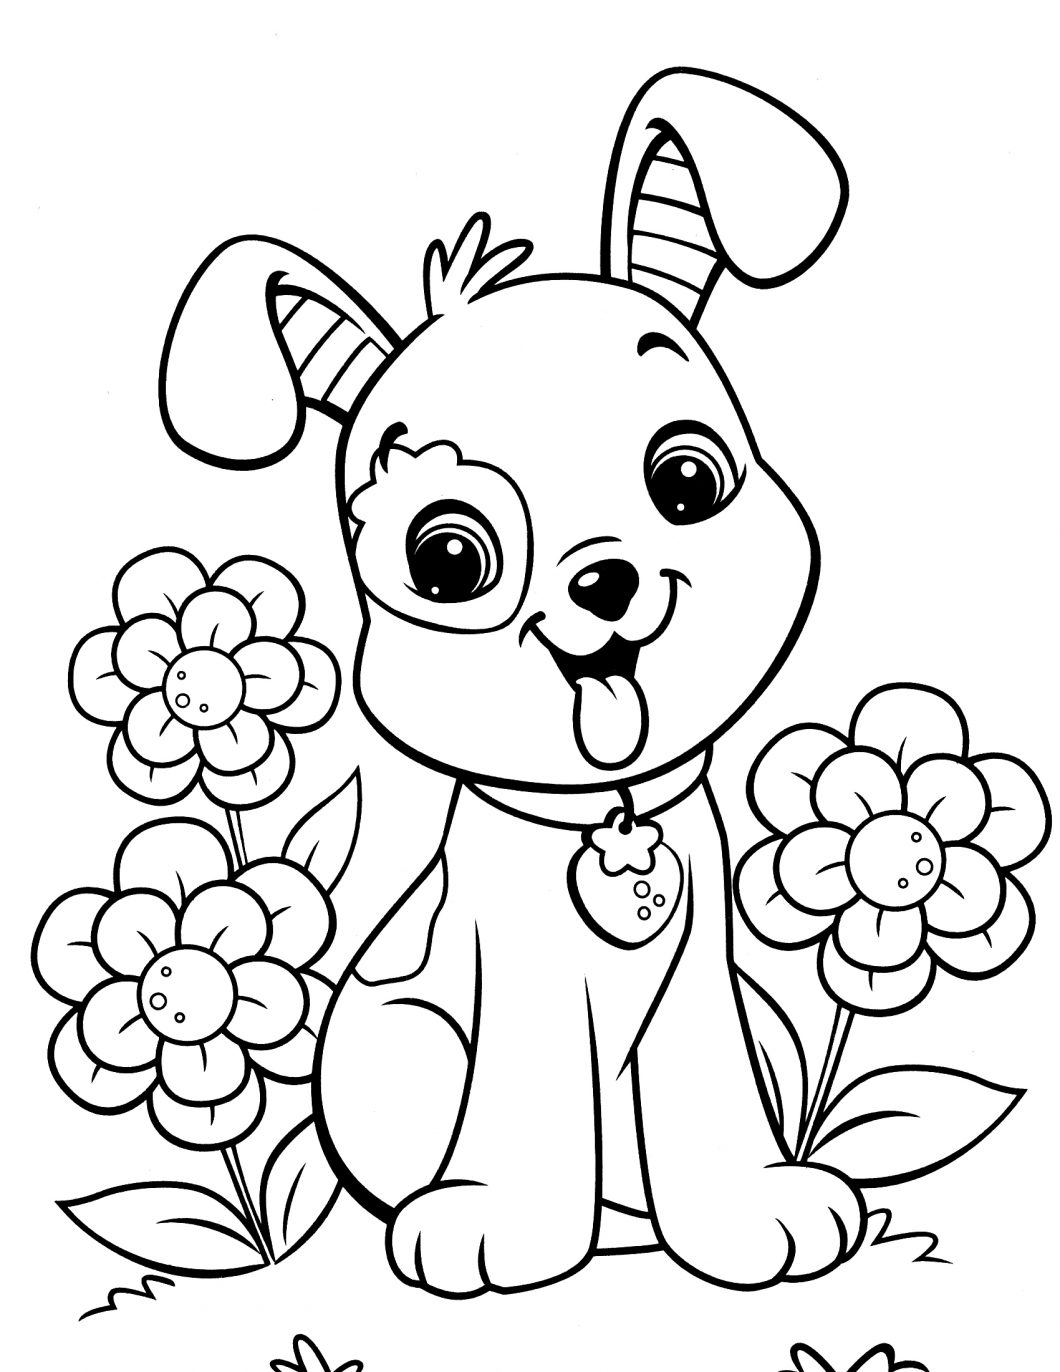 Colors Coloring Pages Coloring Ideas Easy Coloring Pages For Kids Image Inspirations